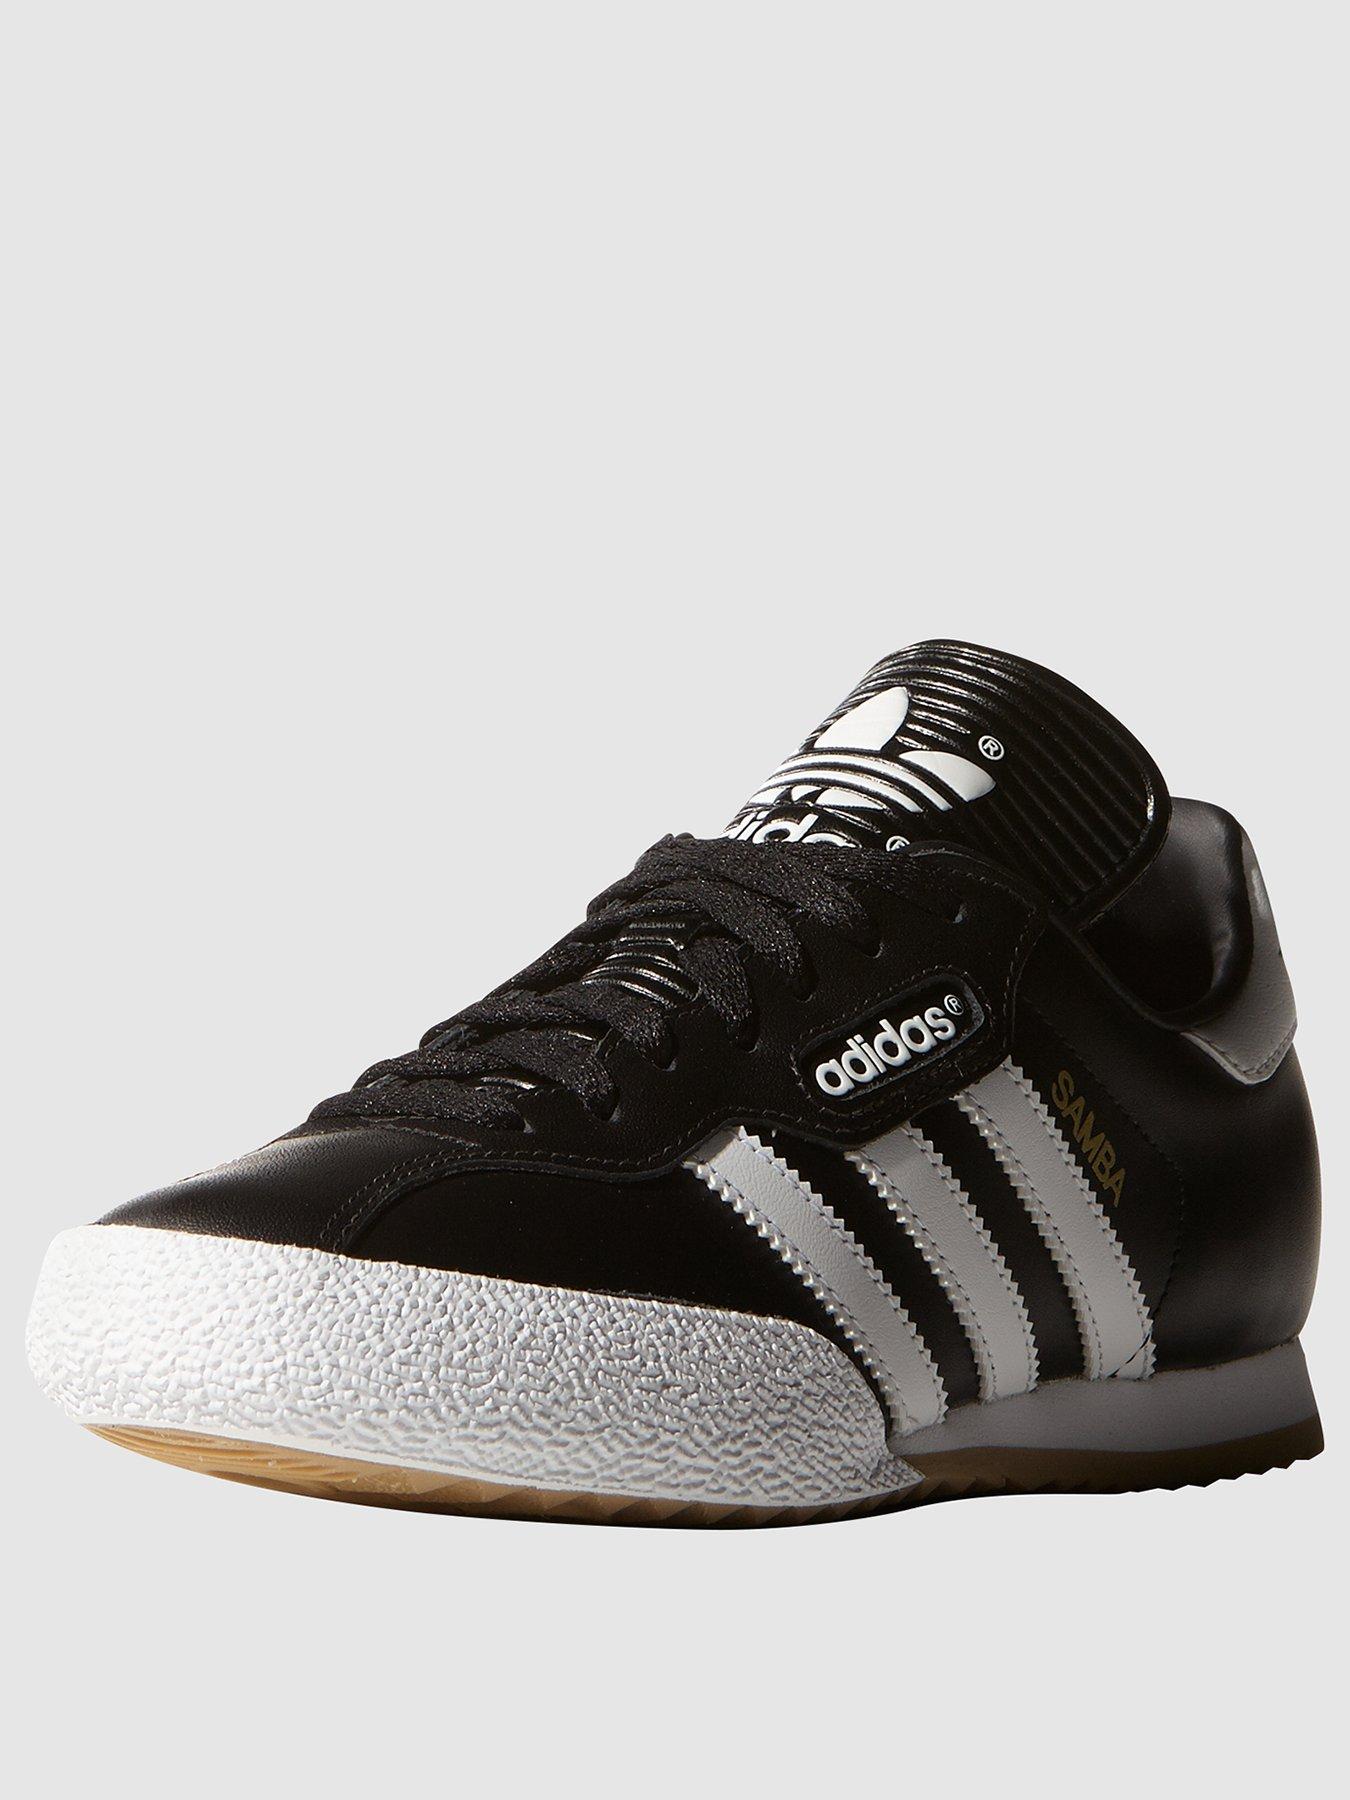 adidas classic suede shoes